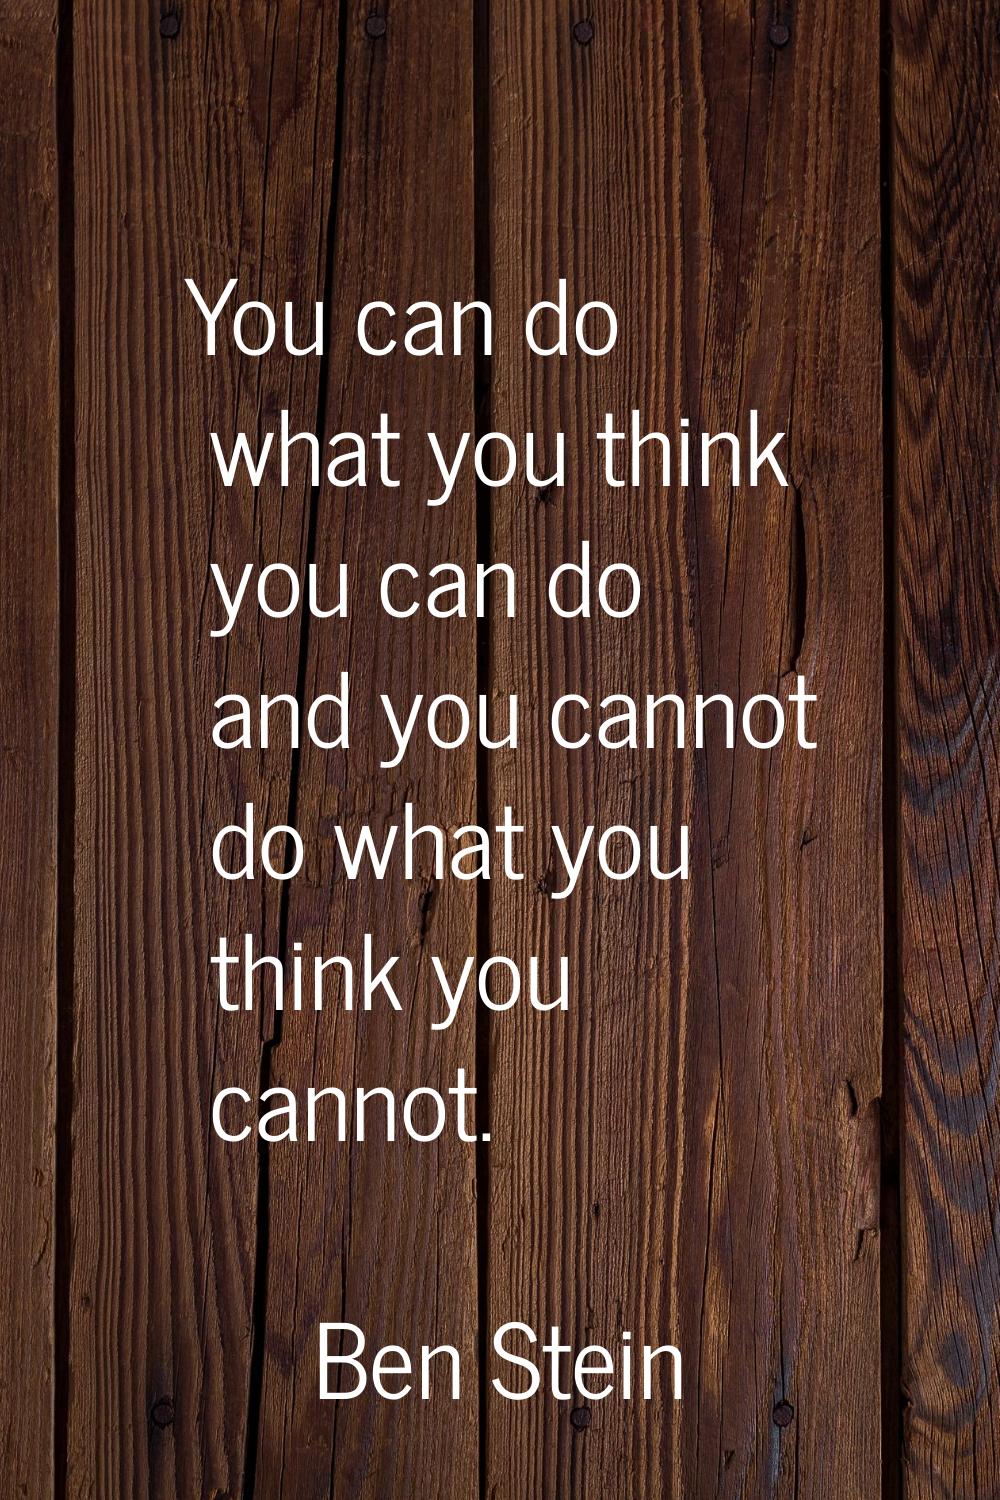 You can do what you think you can do and you cannot do what you think you cannot.